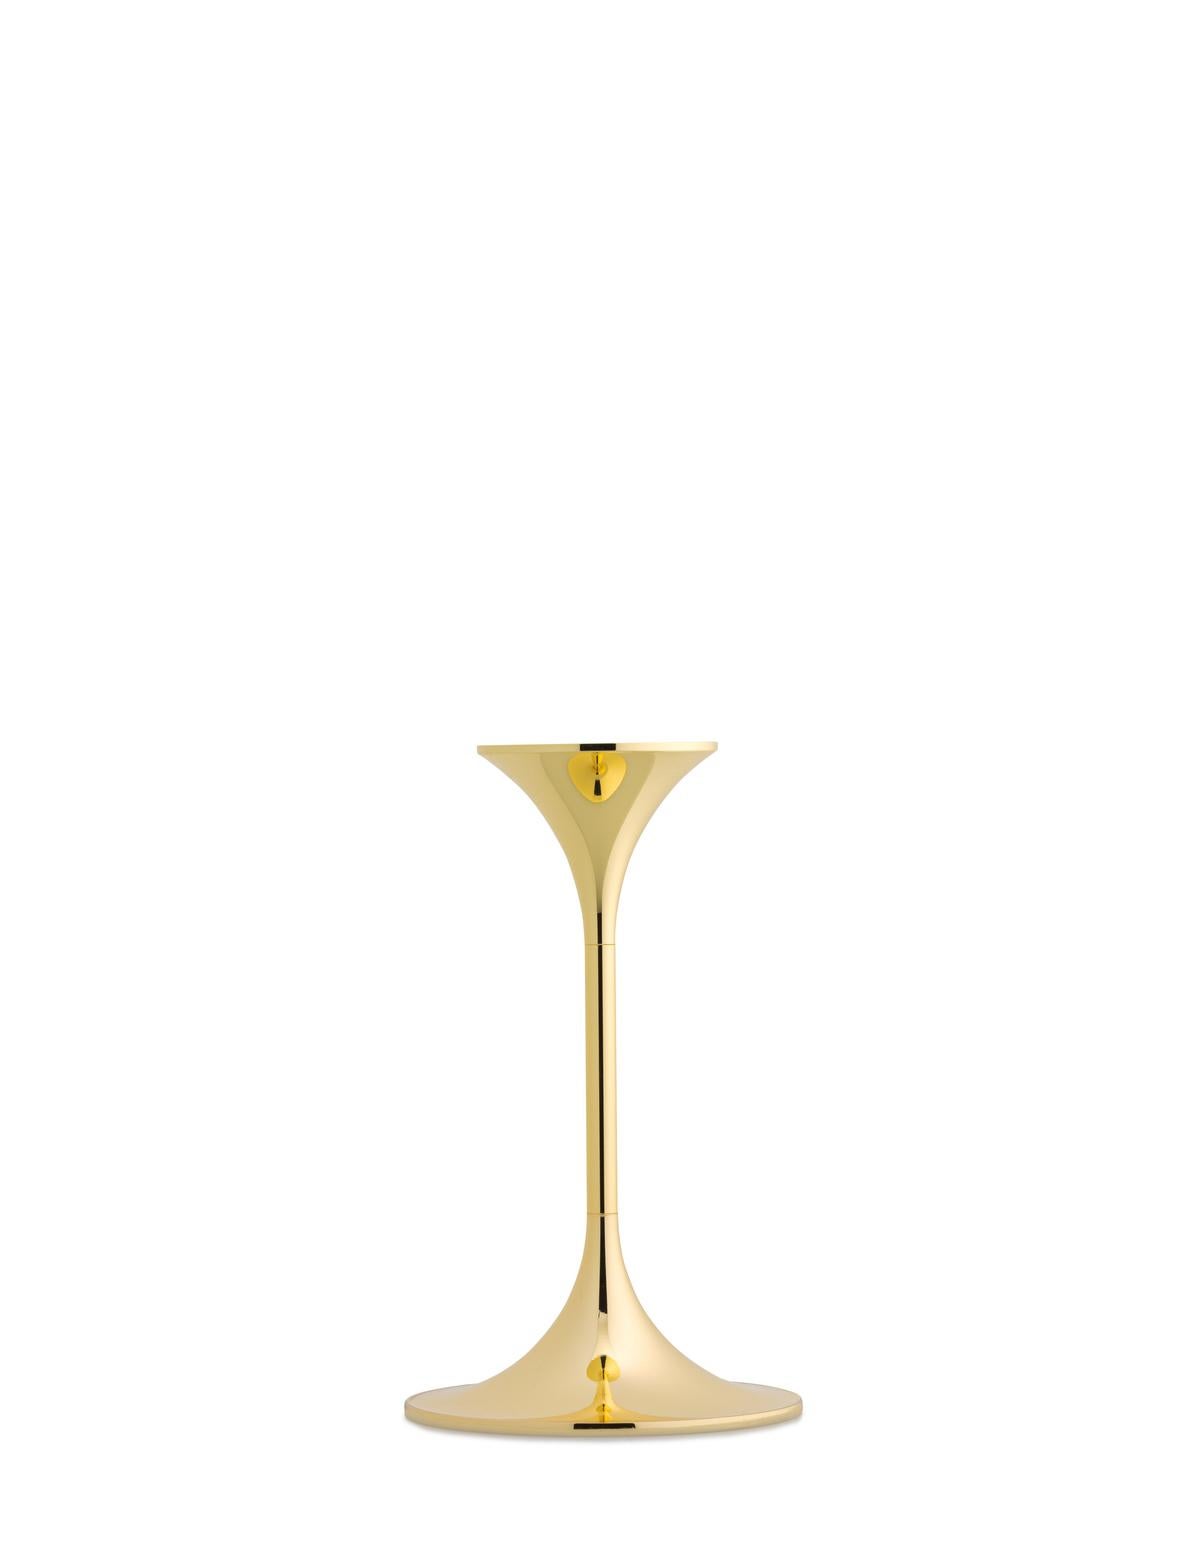 Set of Four Max Brüel 'Jazz' Candleholders, Steel with Brass by Karakter For Sale 2